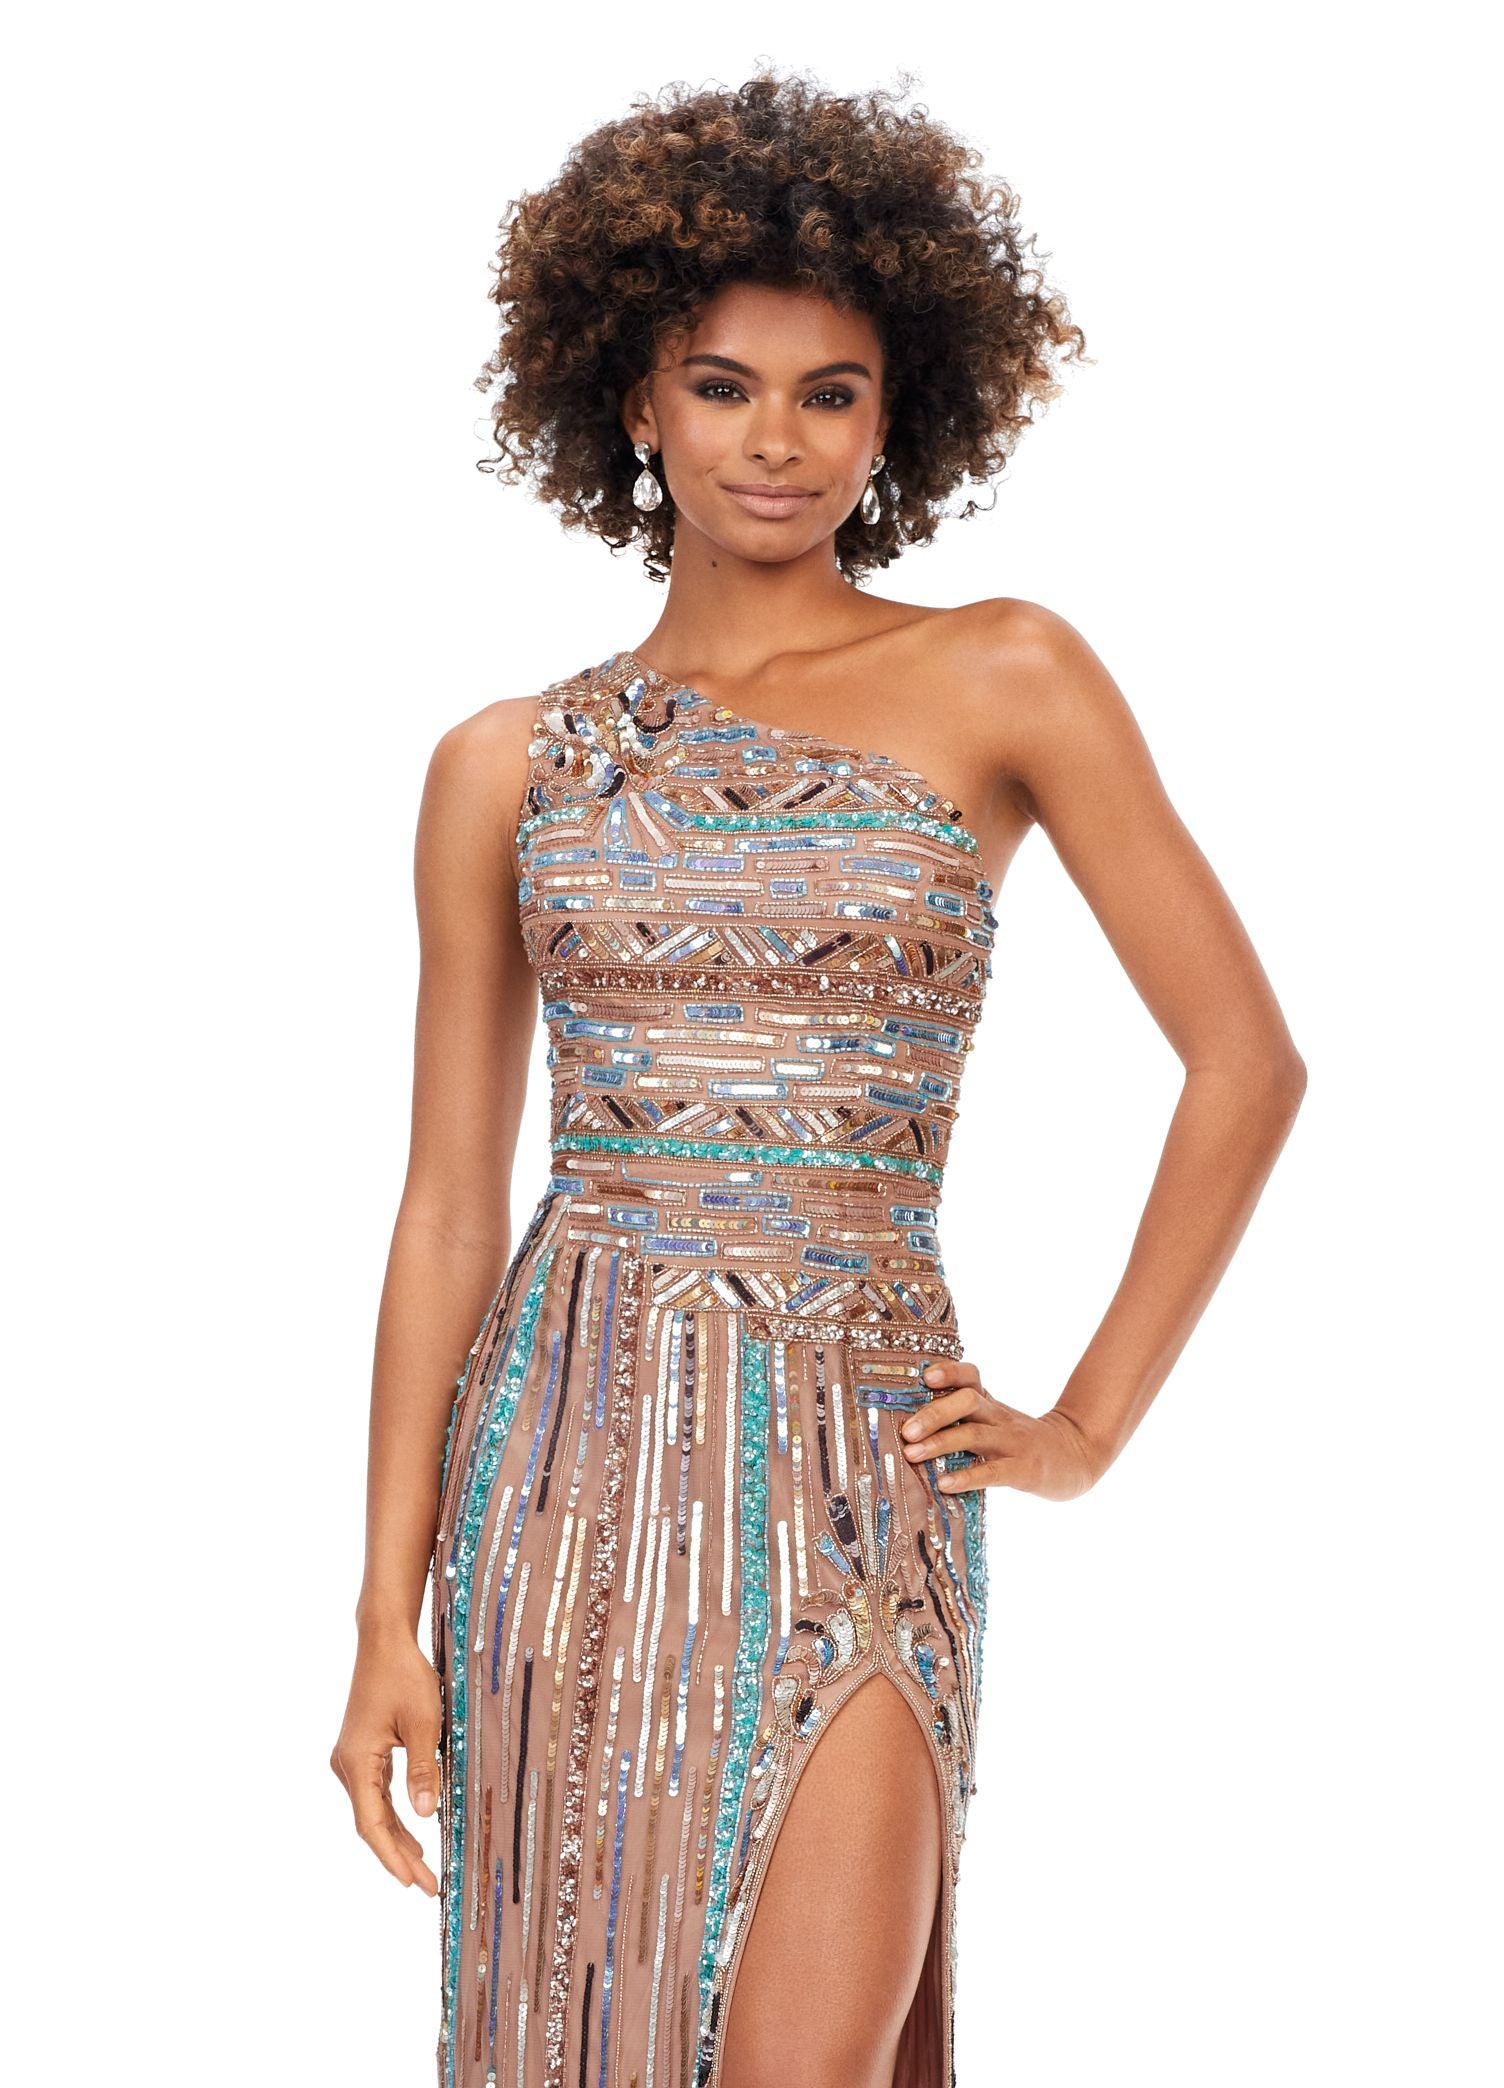 Ashley Lauren 11372 Be the center of the party in this amazing aztec inspired one shoulder gown. With pops of vibrant turquoise throughout the gown, this style will leave spectators speechless! One Shoulder Open Back Left Leg Slit Fully Hand Beaded COLORS: Multi